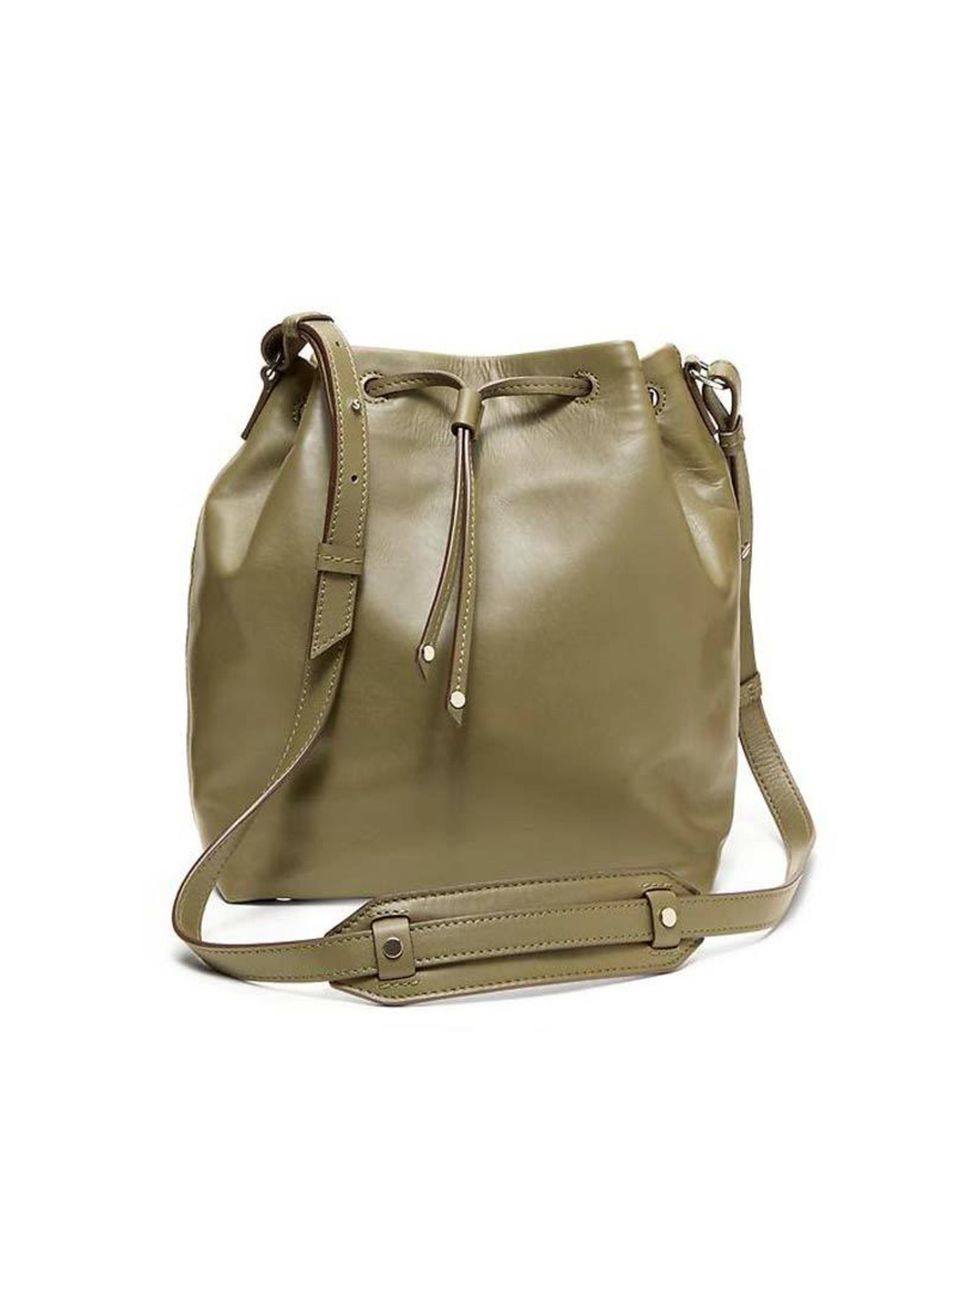 <p>This bucket bag is Executive Fashion and Beauty Director Kirsty Dale's latest buy.</p>

<p><a href="http://bananarepublic.gap.co.uk/browse/product.do?cid=1004098&vid=1&pid=000506038SB15-18530" target="_blank">Banana Republic</a> bag, £89.50</p>